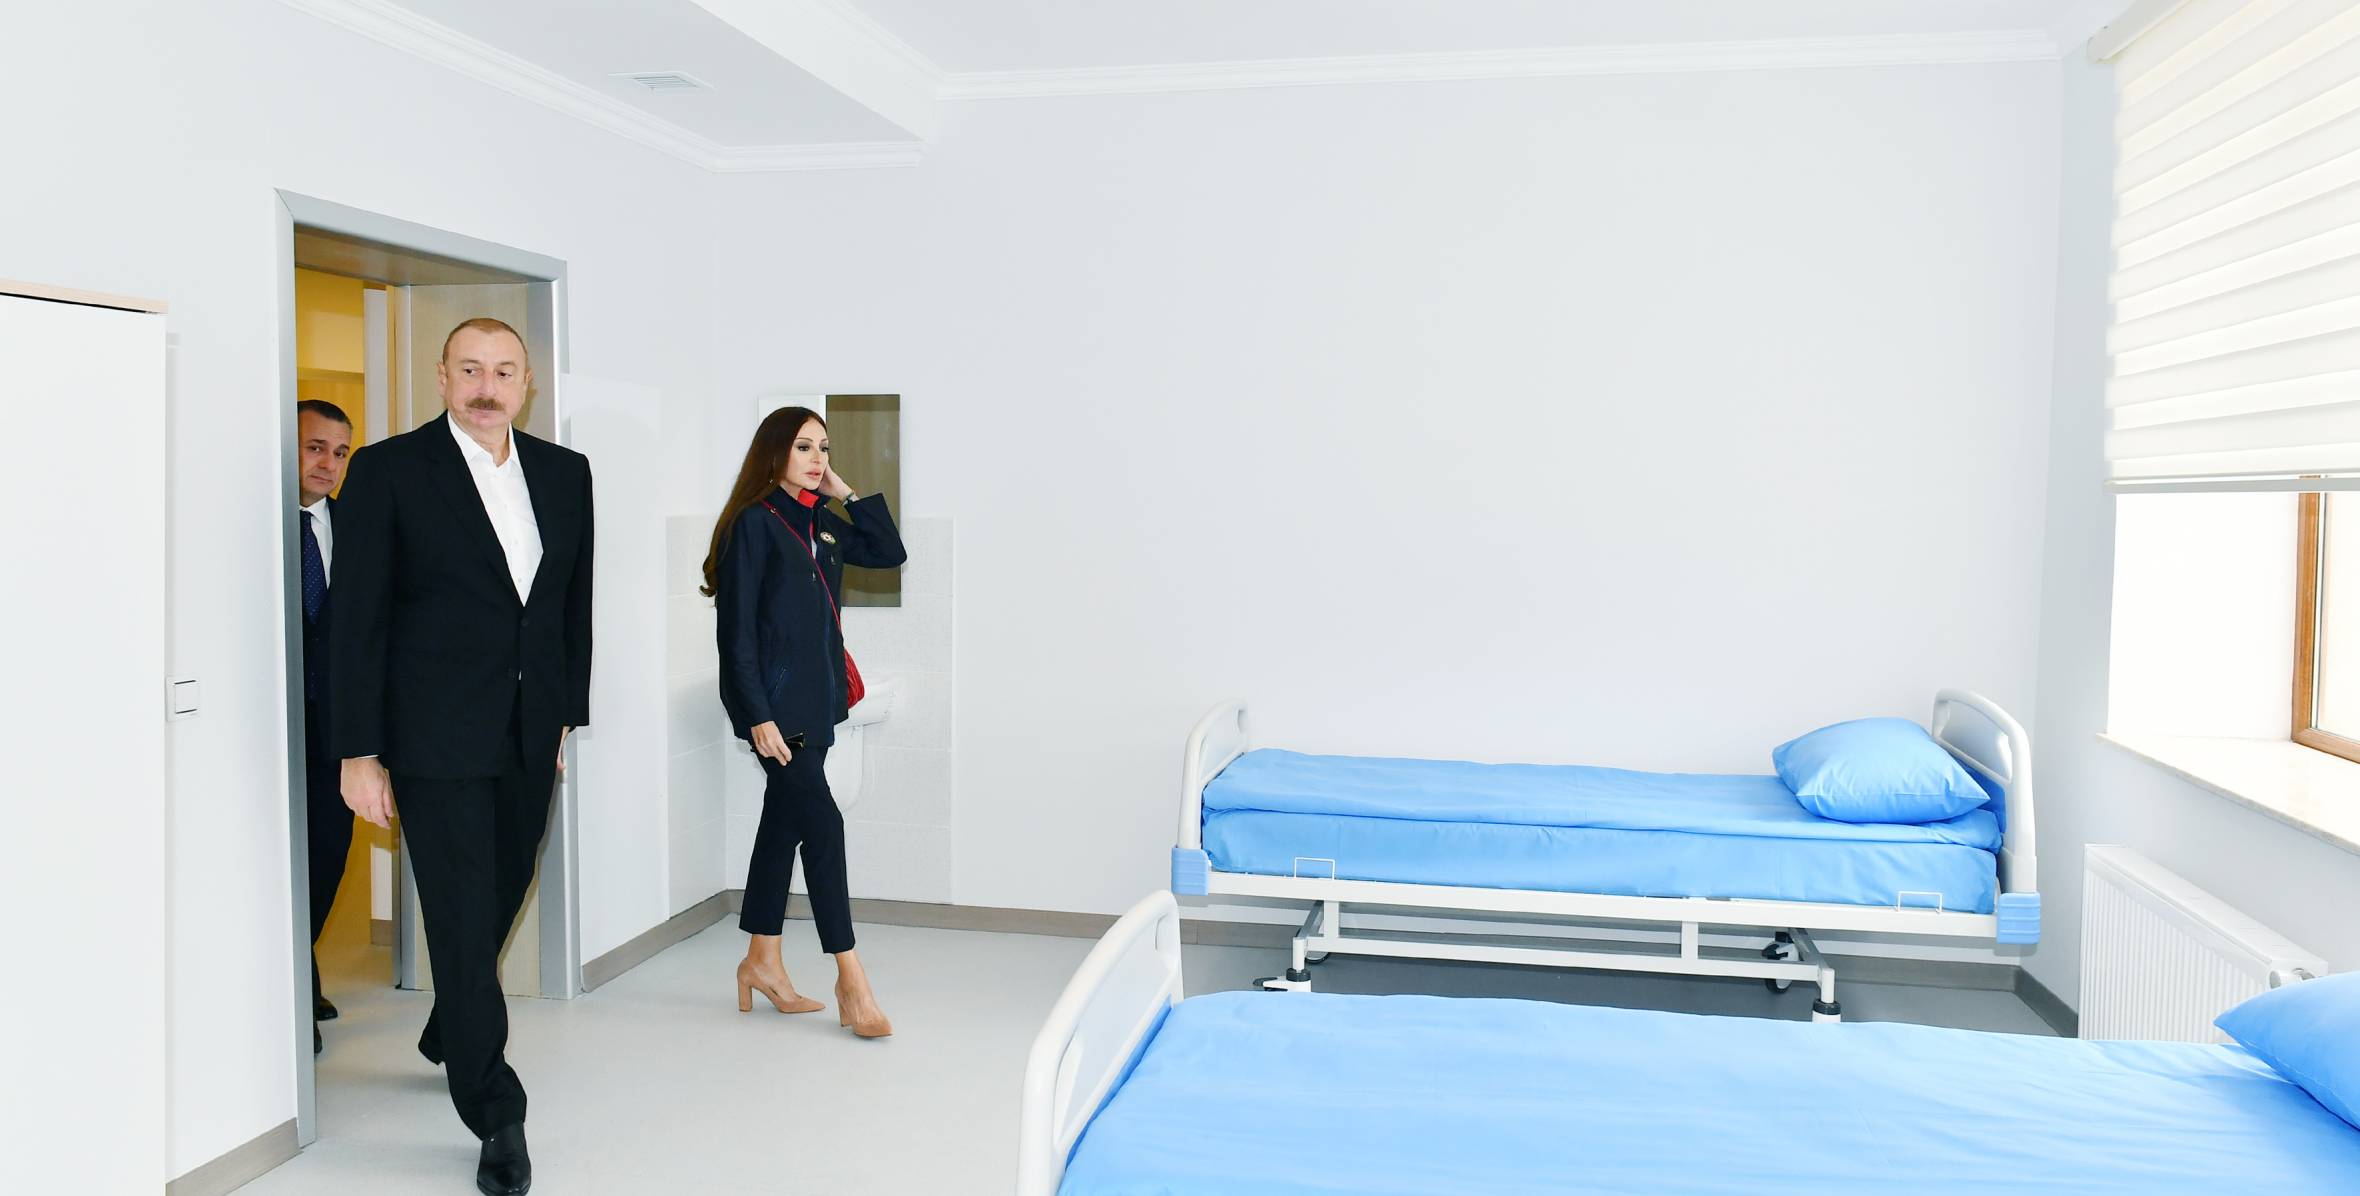 Ilham Aliyev and First Lady Mehriban Aliyeva have viewed the conditions created after the overhaul at the 80-bed Maternity Home and Children’s Polyclinic of the Salyan District Central Hospital